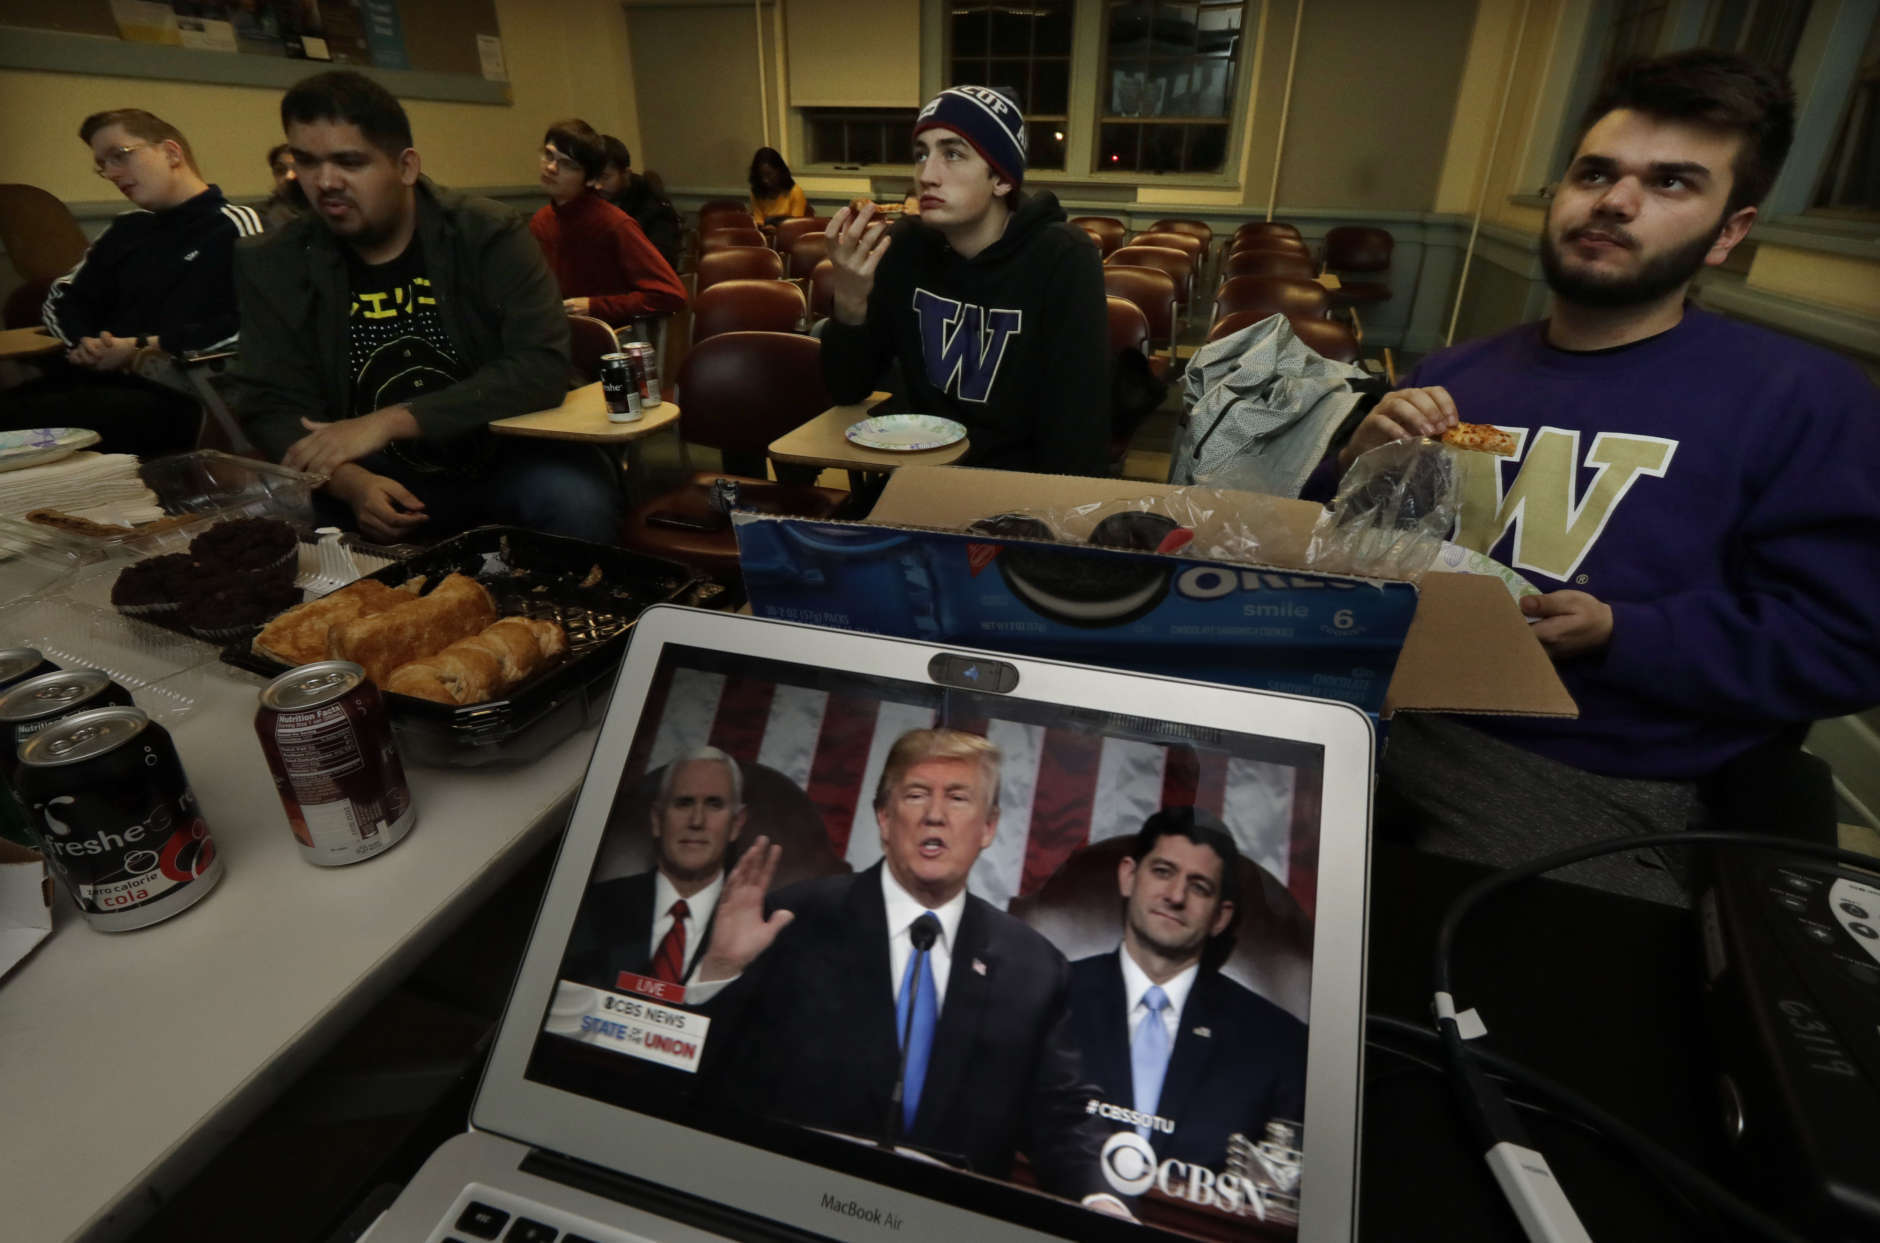 Members of the College Republicans at the University of Washington eat pizza and other snacks as they watch a broadcast of President Donald Trump as he gives his State of the Union speech during an on-campus viewing party, Tuesday, Jan. 30, 2018, in Seattle. (AP Photo/Ted S. Warren)